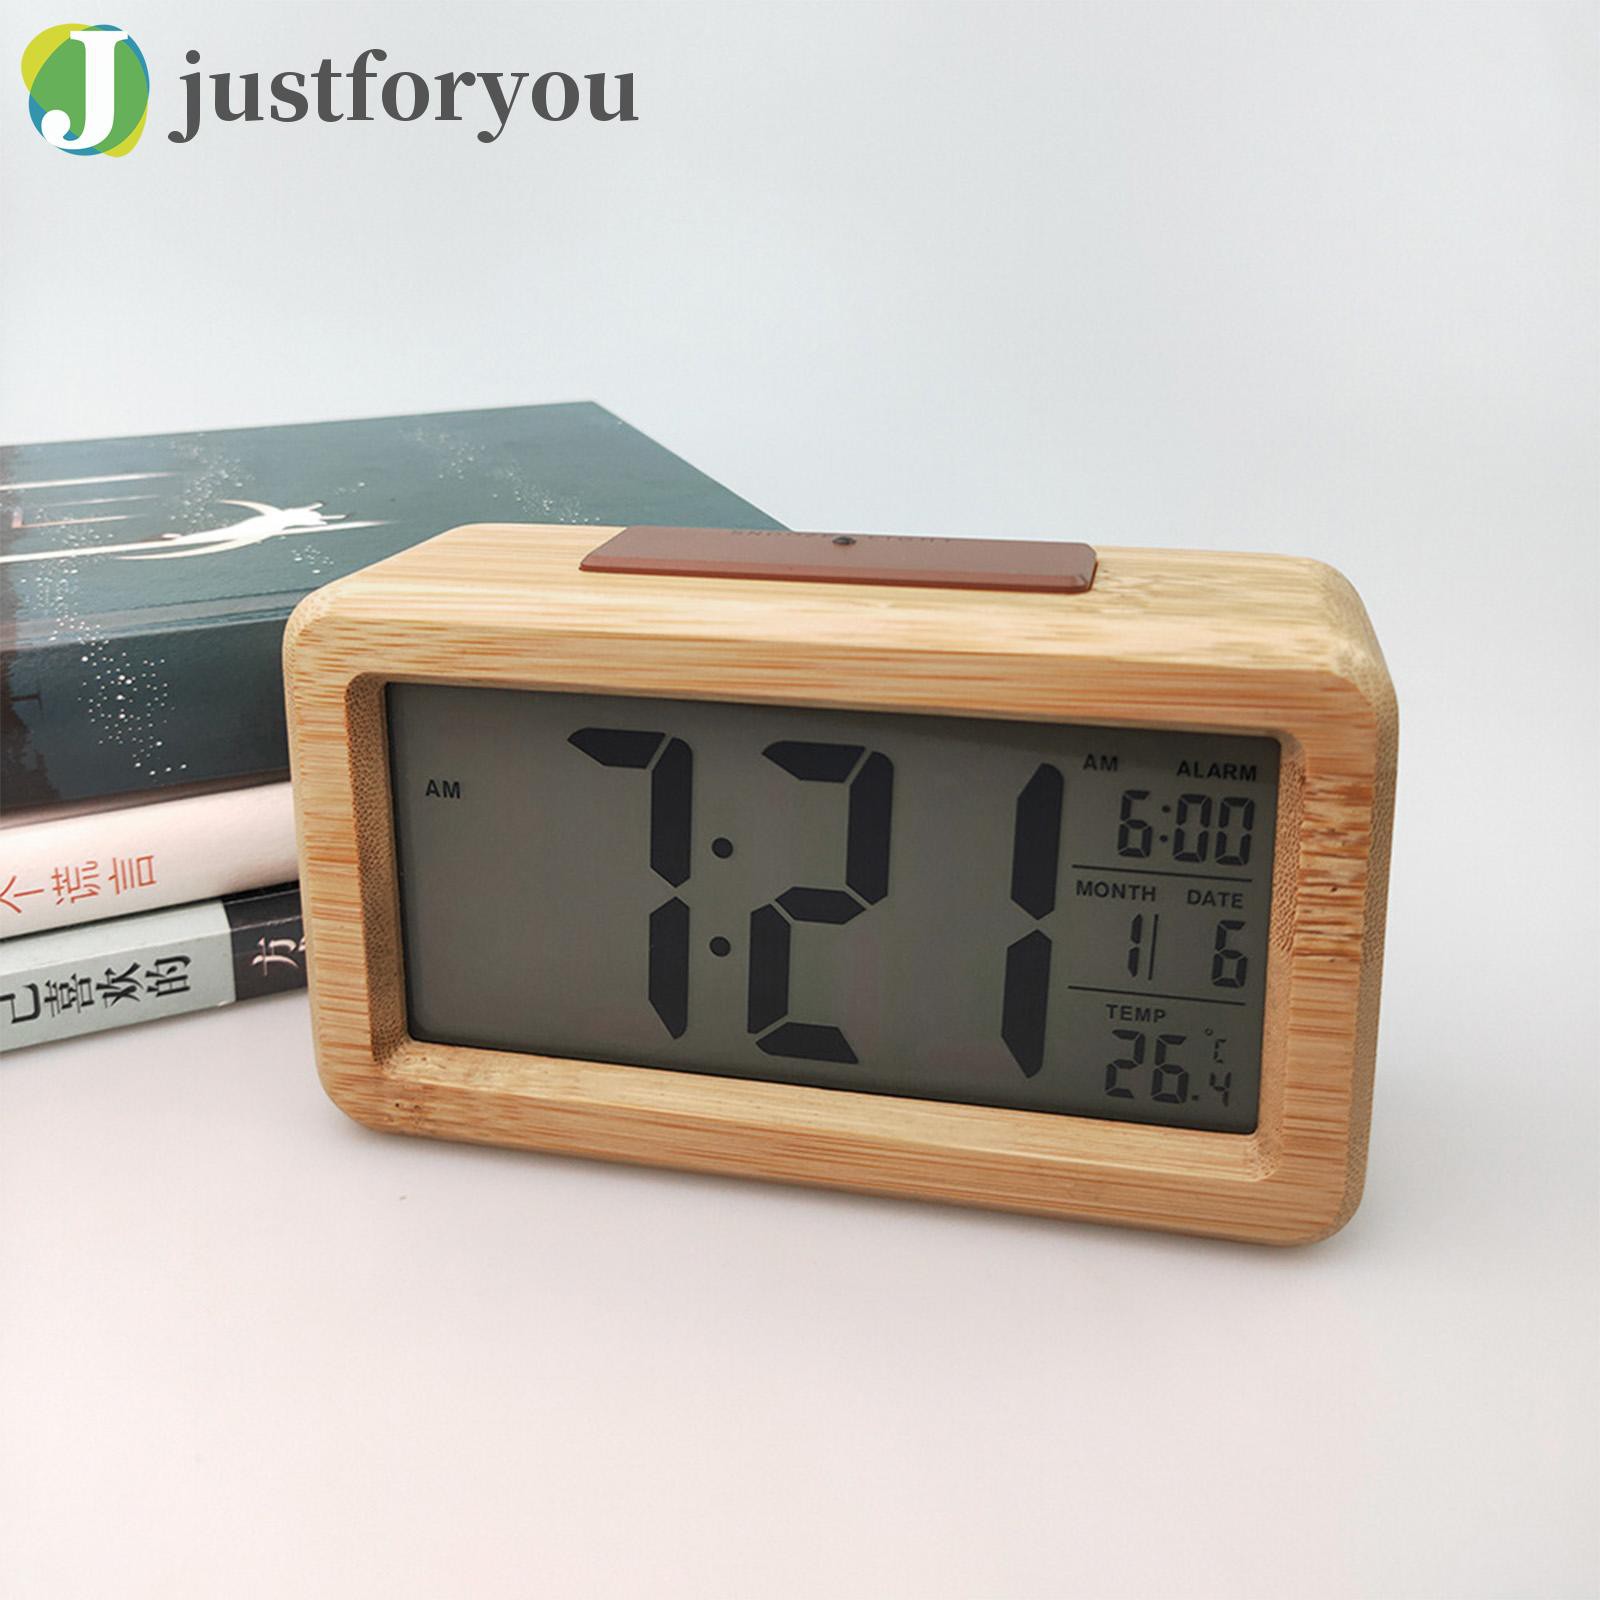 Justforyou Digital Alarm Clock, Wooden Time Display Battery Operated Electronic Clocks